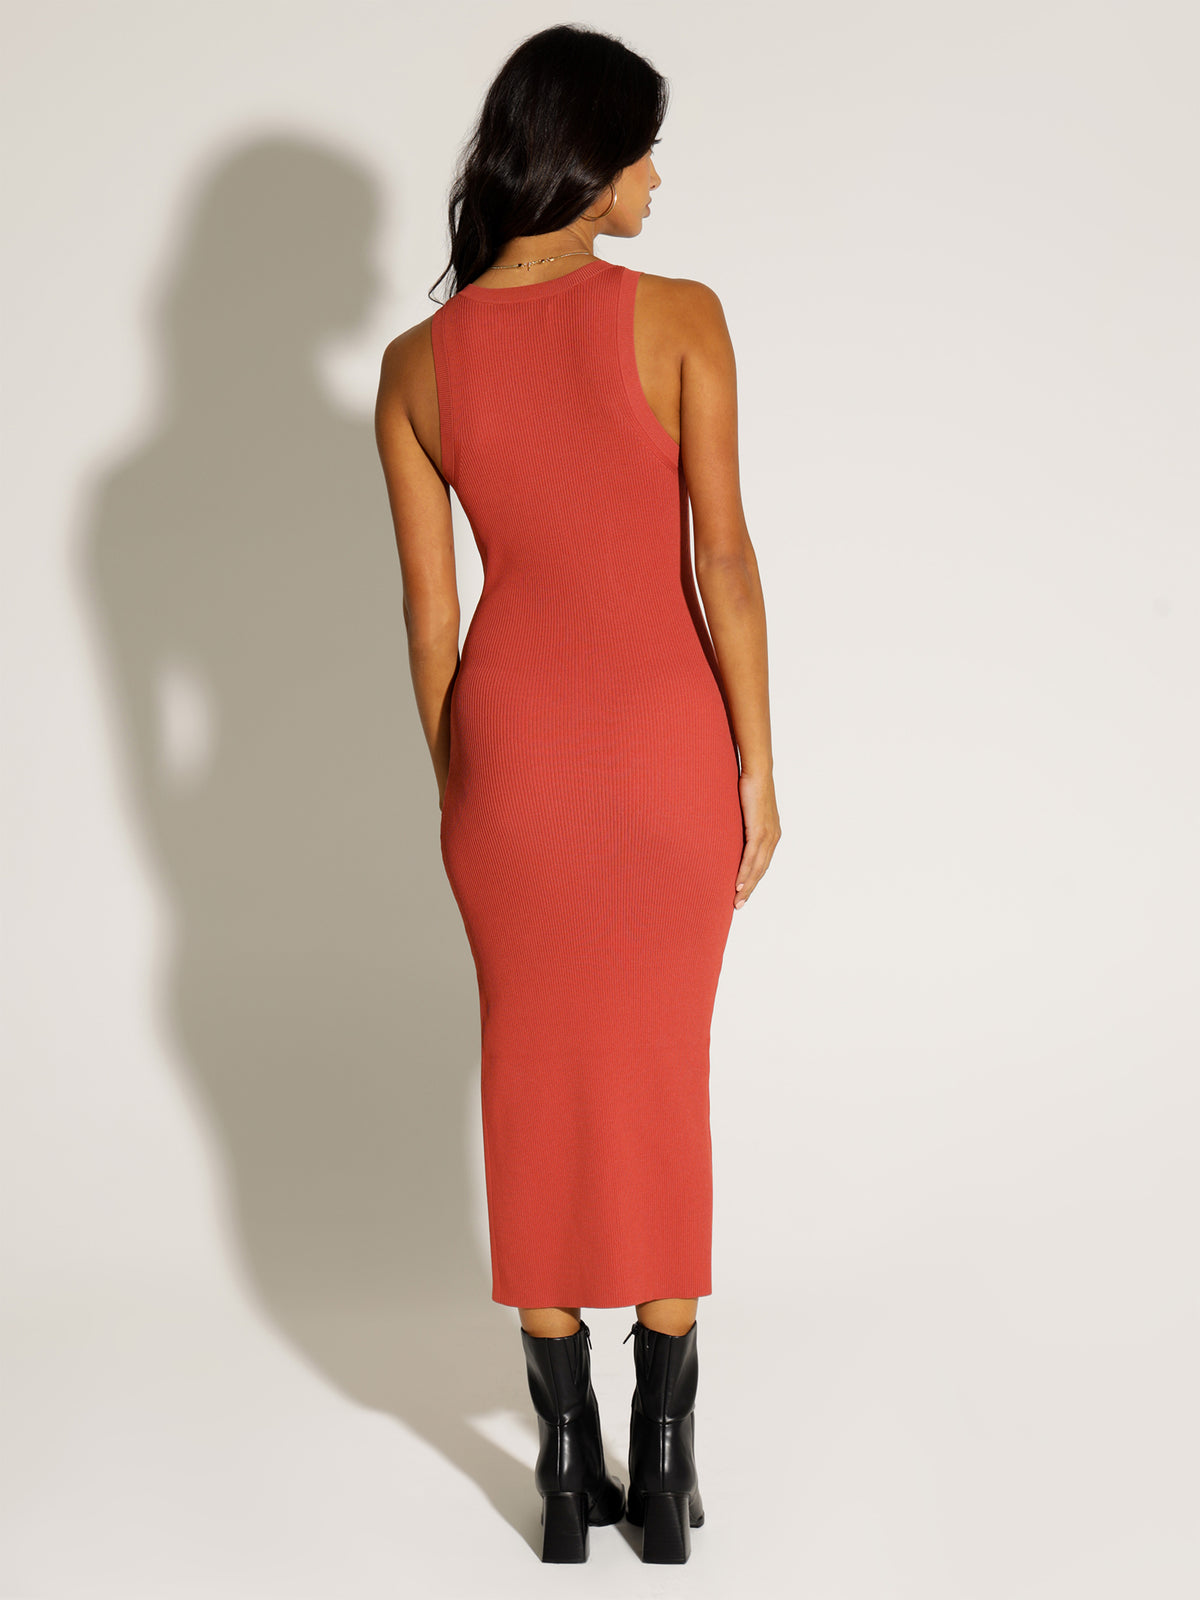 Shiva Knit Dress in Punch Red